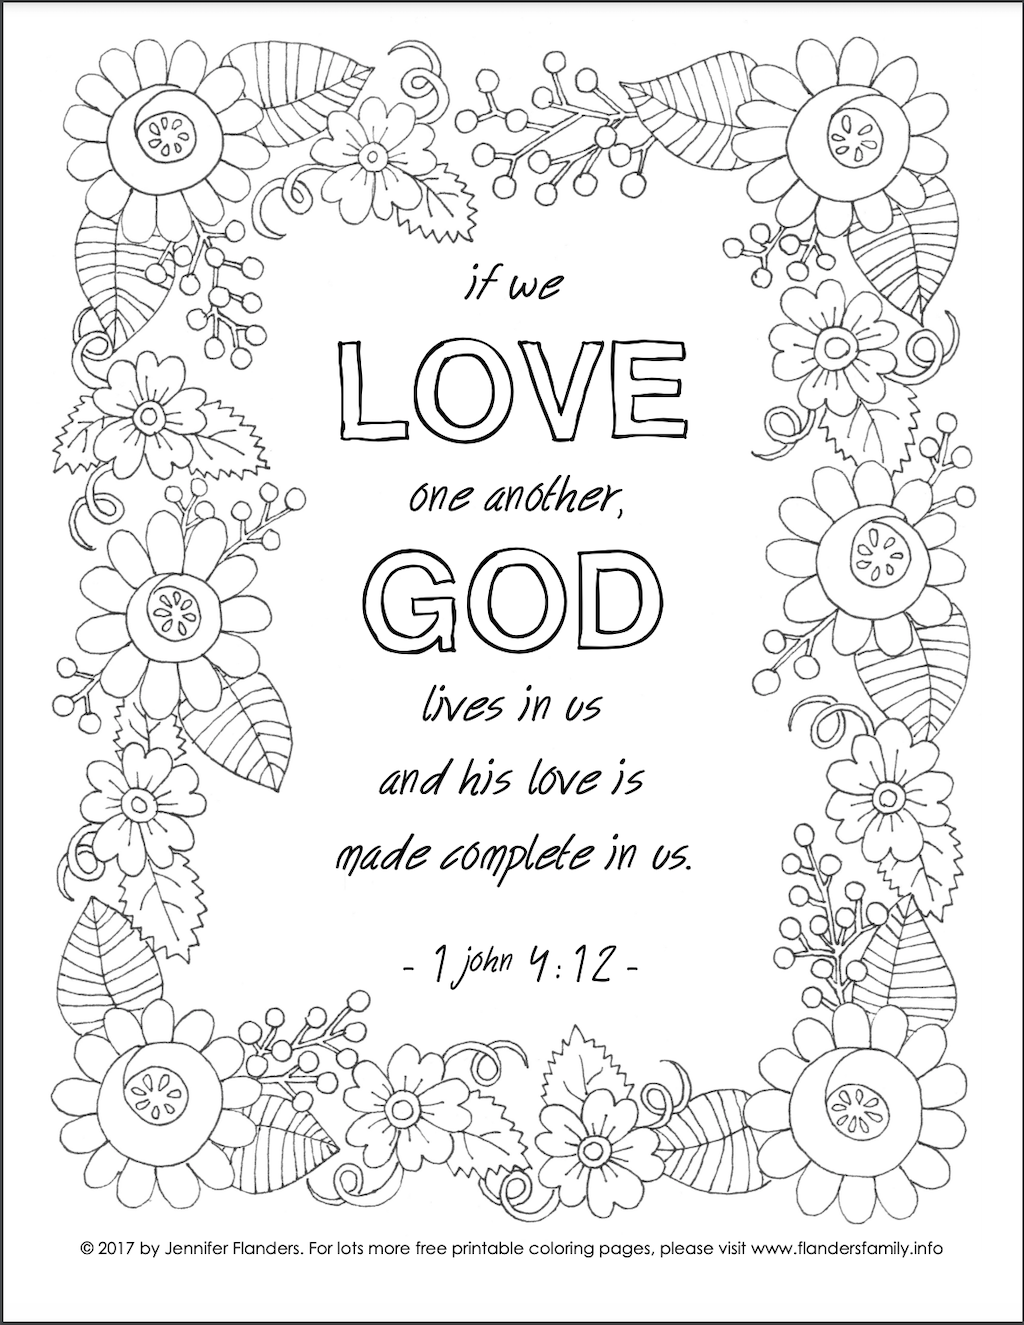 love made complete coloring page flanders family homelife